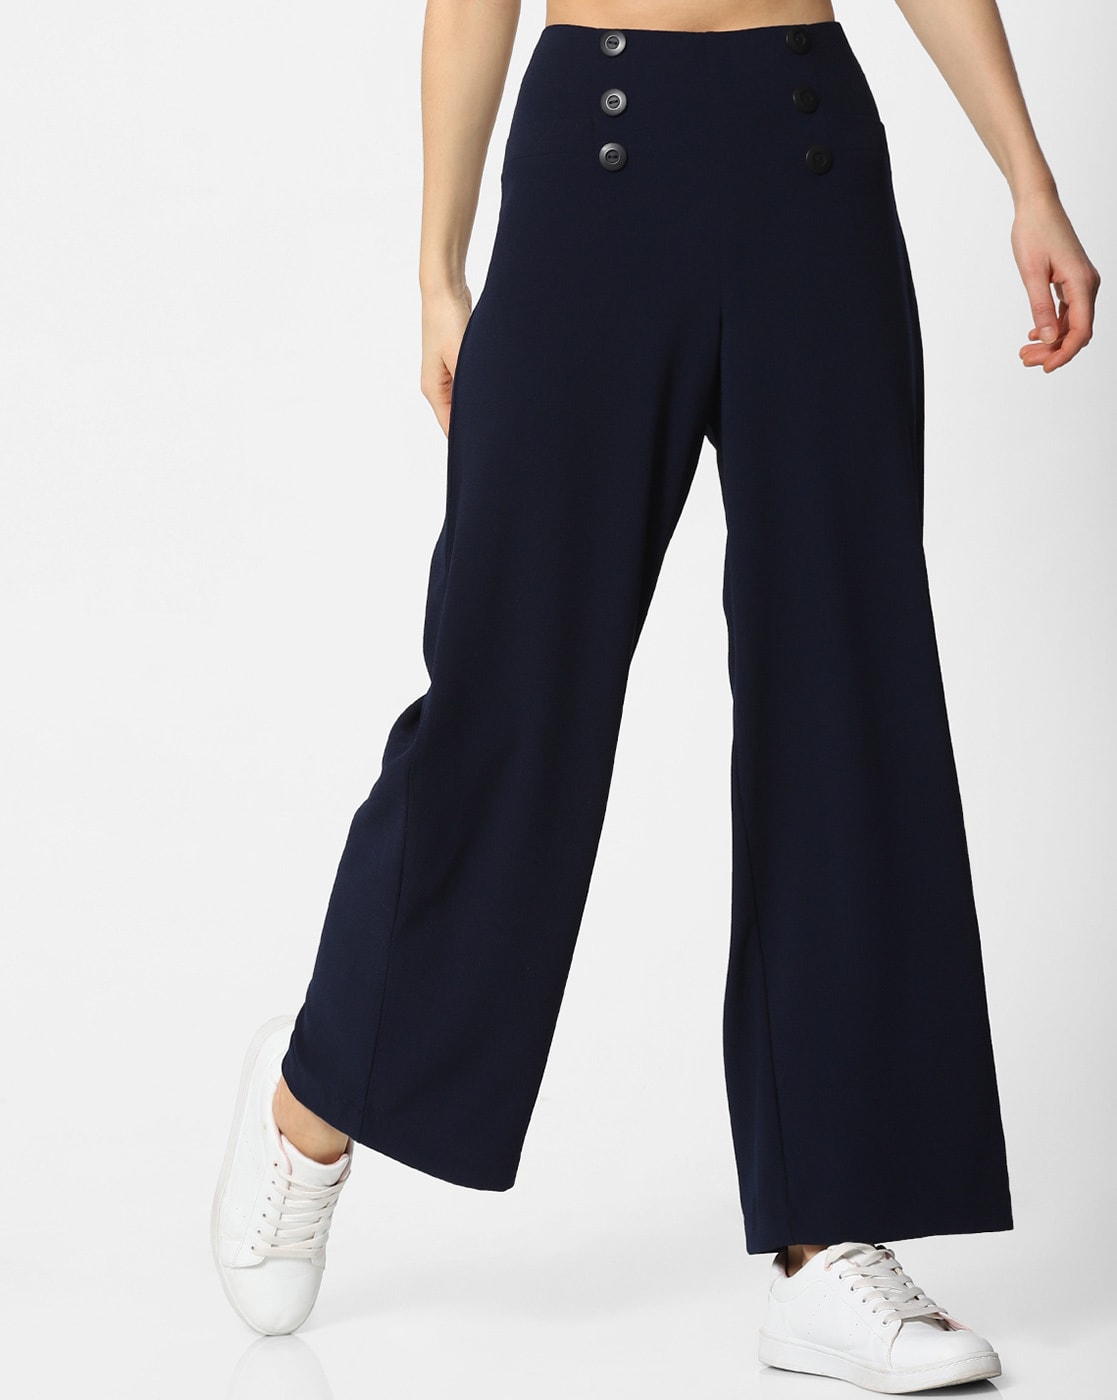 Buy Womens Sailor Pants Online In India  Etsy India